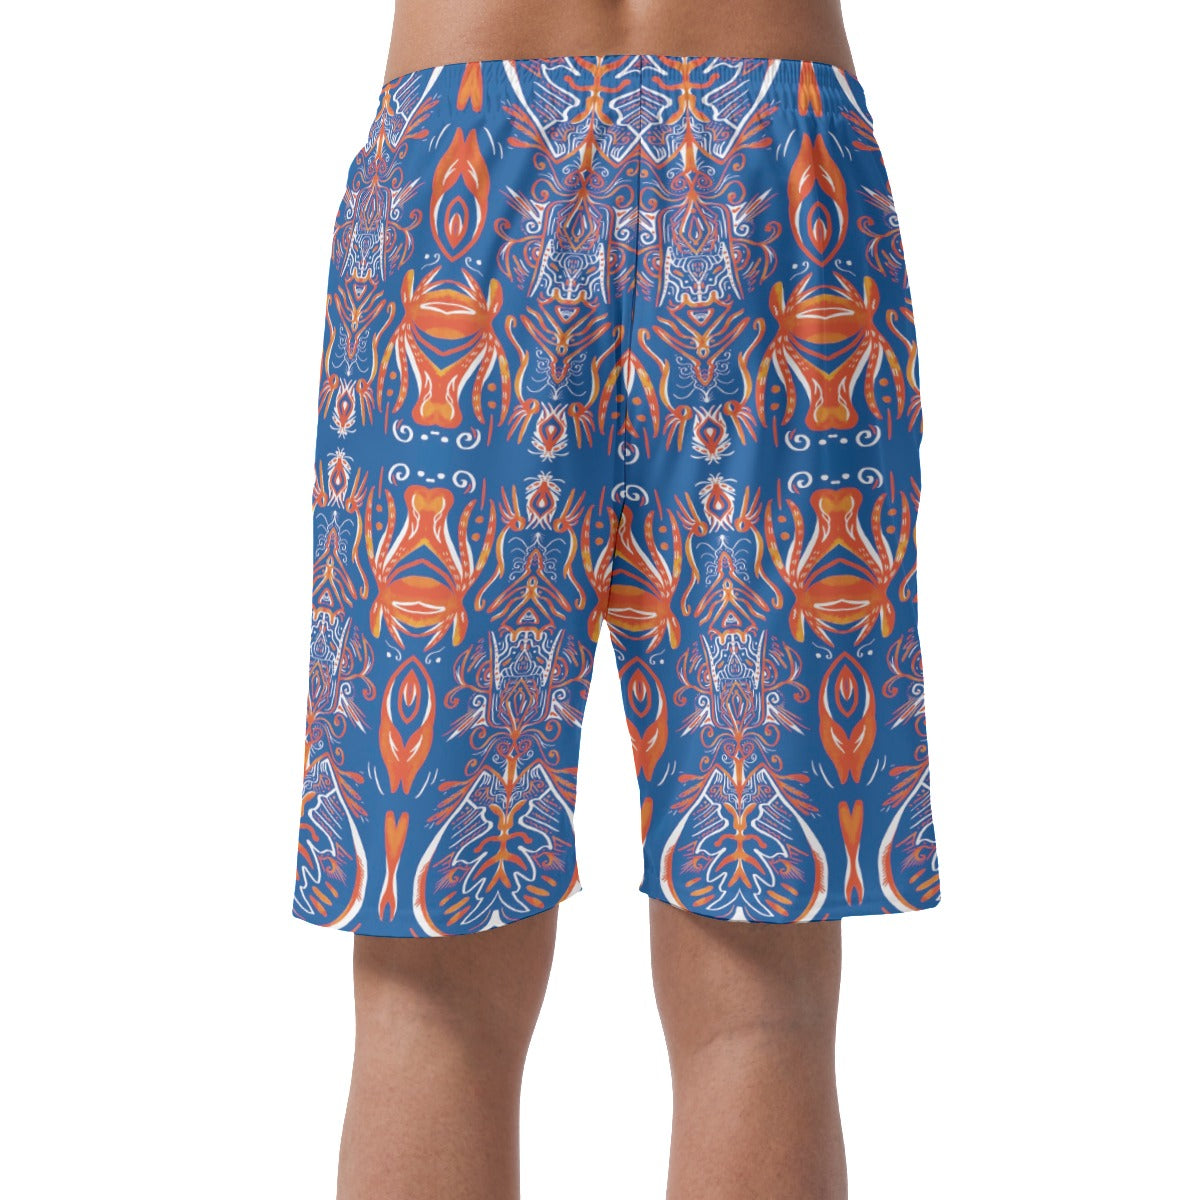 All-Over Print Men's Casual Shors